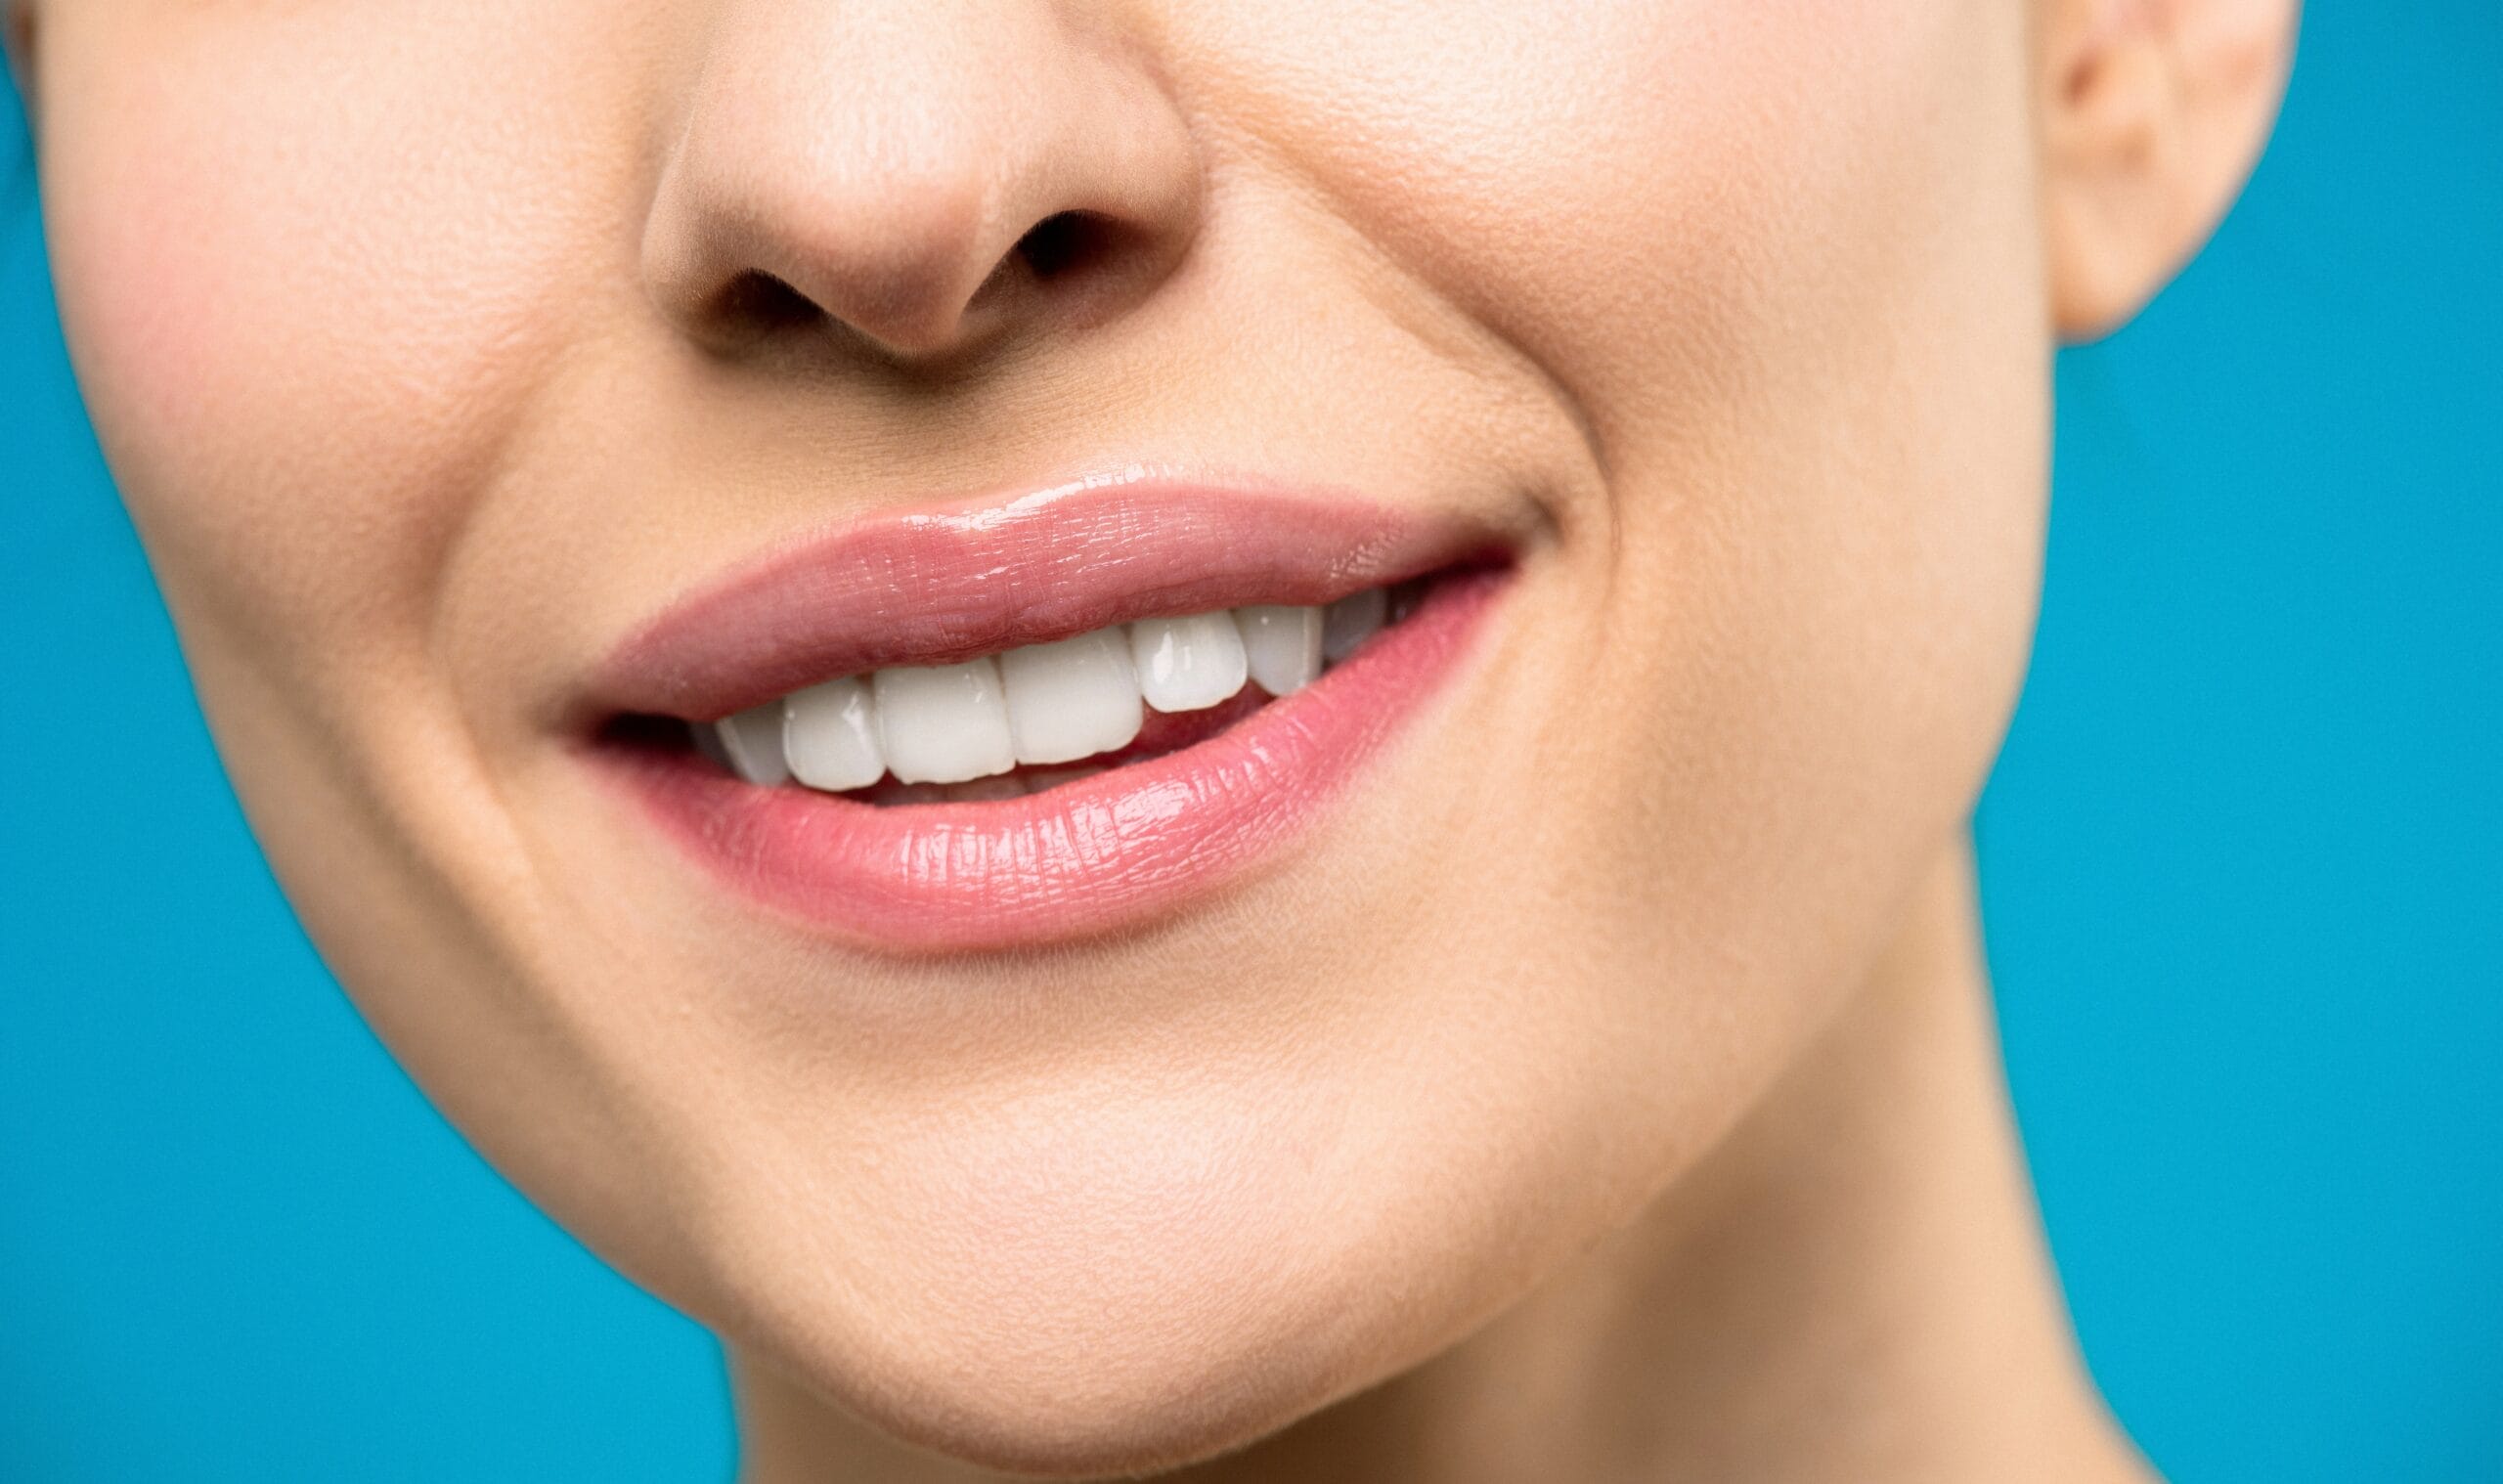 Do You Need Cosmetic Dentistry? Here’s How To Tell